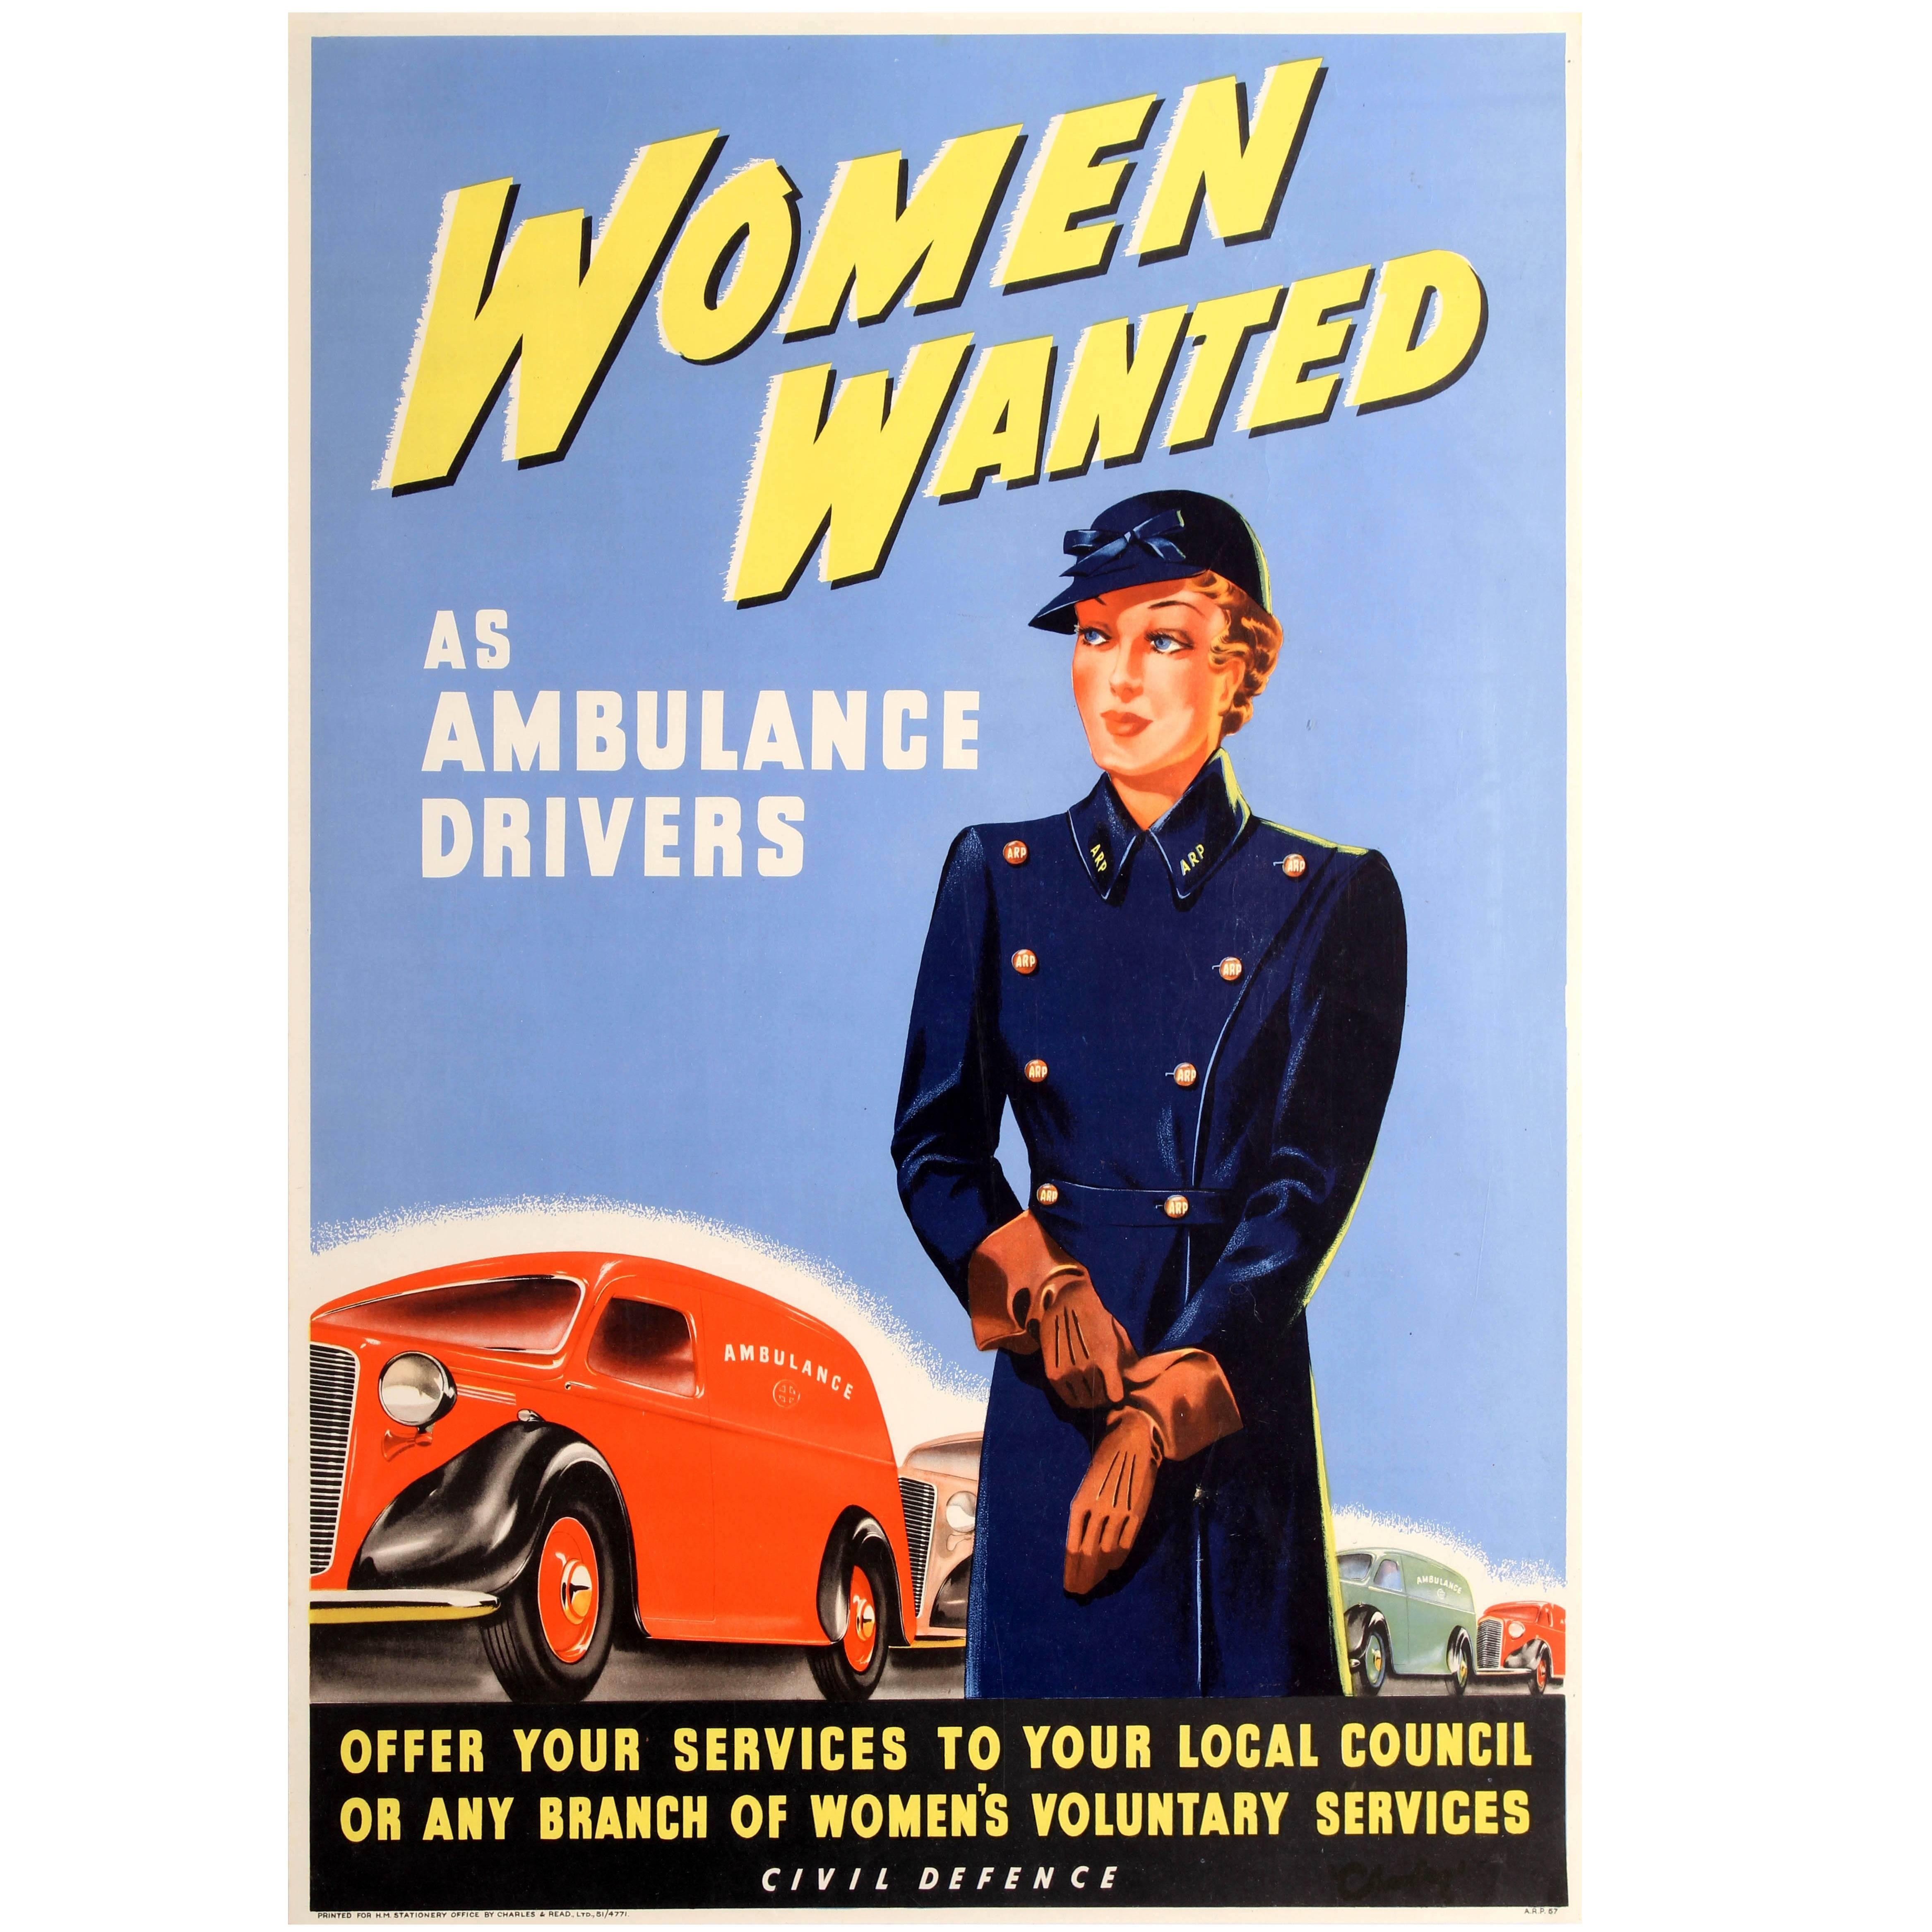 Original World War Two Civil Defence Poster - Women Wanted as Ambulance Drivers